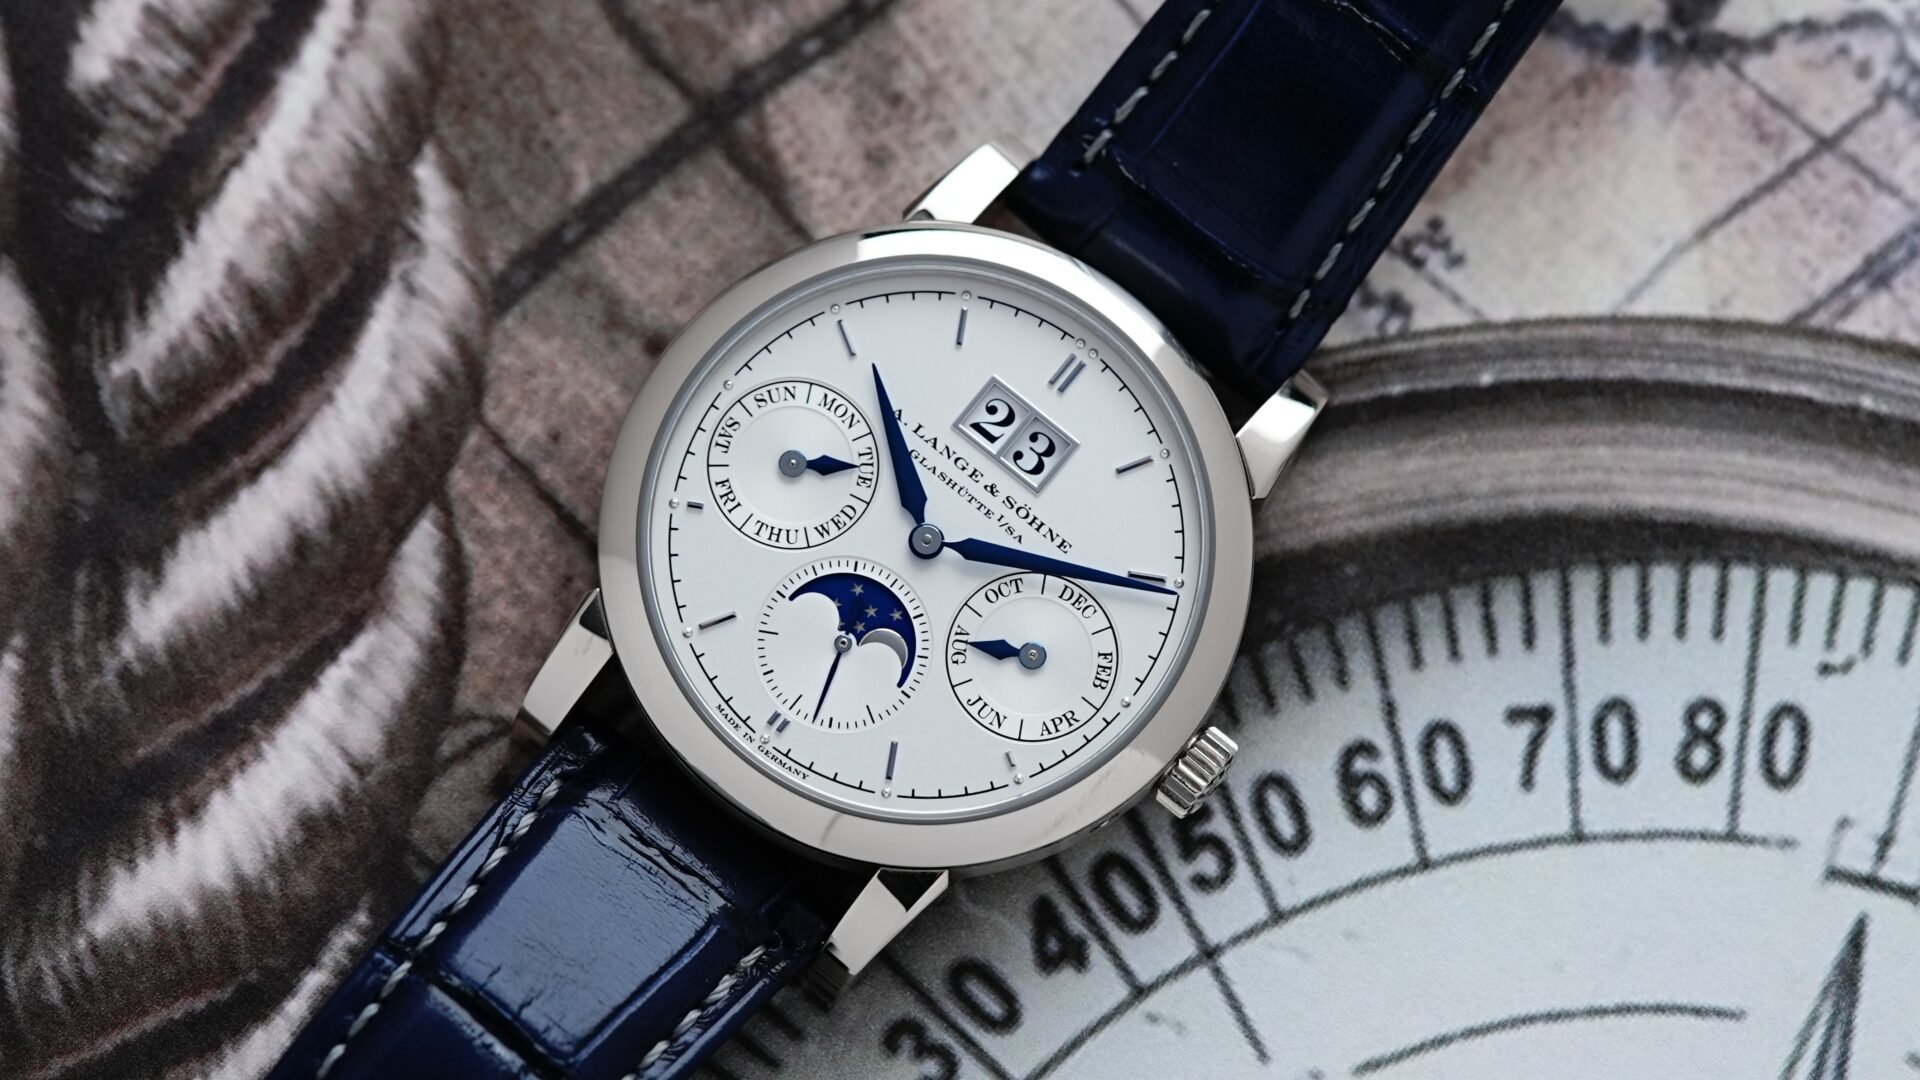 A. Lange & Söhne Saxonia Annual Calendar watch pictured with compass paper image in background.